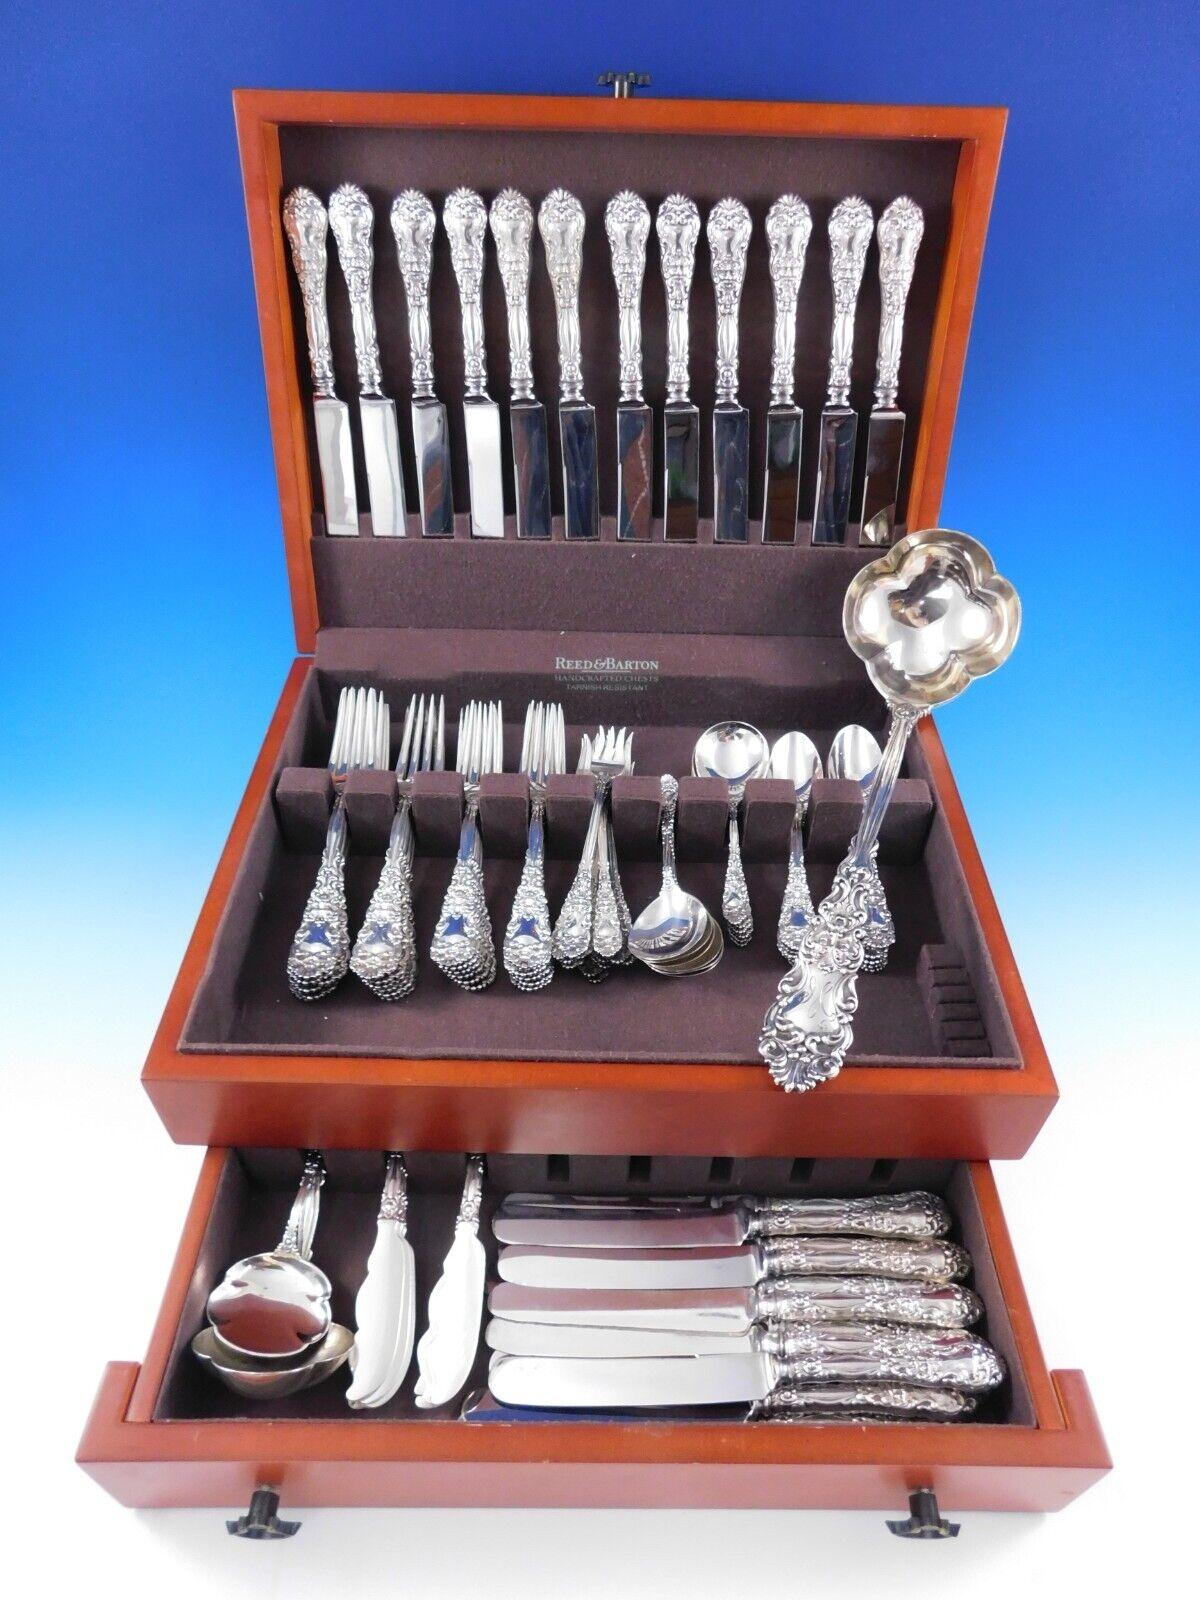 Exquisite figural Renaissance by Dominick and Haff flatware set, 99 pieces. The Renaissance pattern was patented in 1894. The handle front and the back at the base of the handle are decorated with scroll designs and a classic bearded man's face